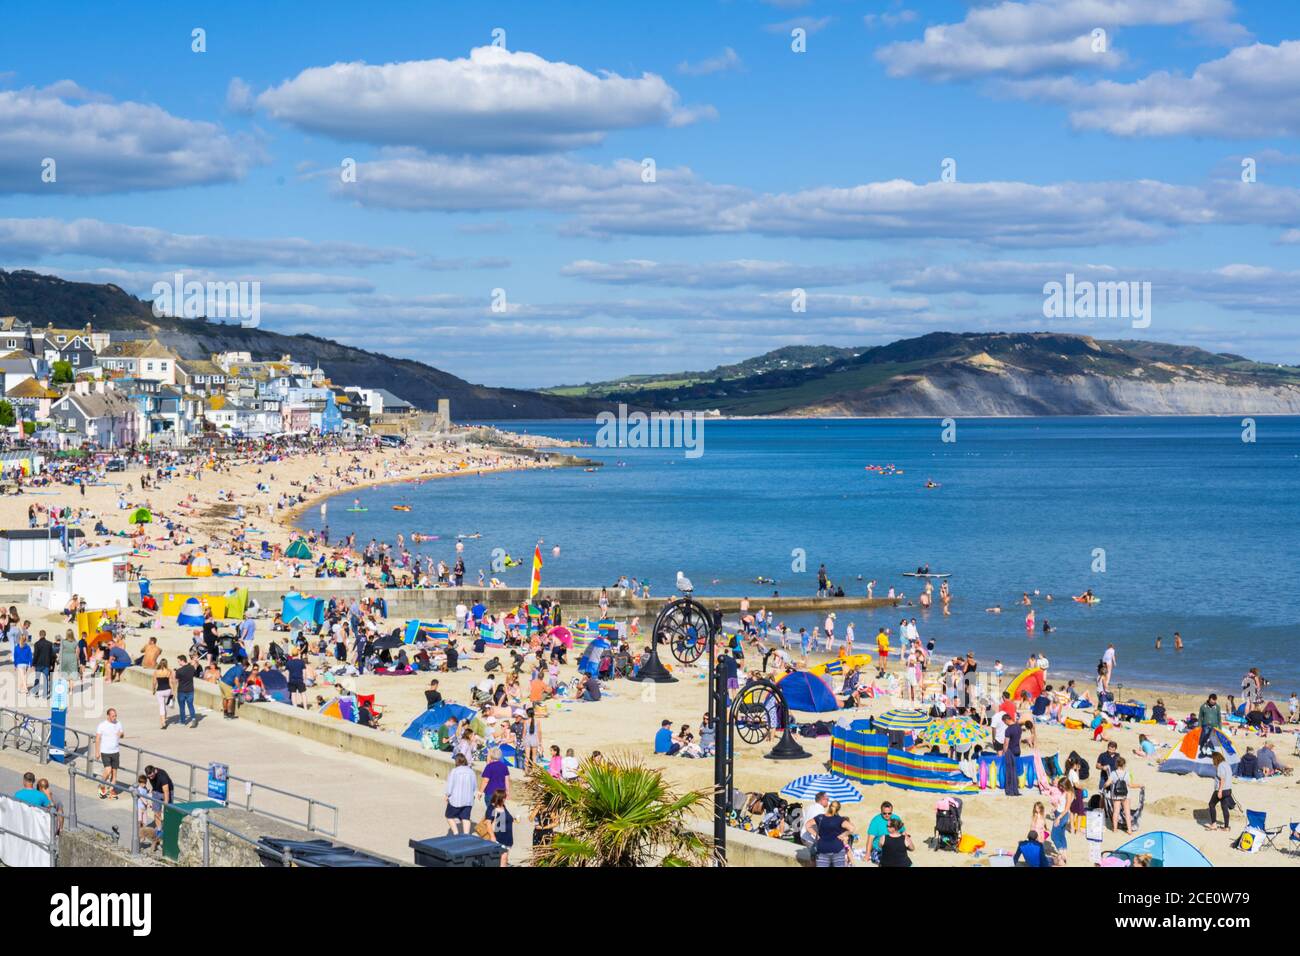 Lyme Regis, Dorset, UK. 30th August 2020. UK Weather: After a cold start crowds of staycationers, holidaymakers, beachgoers flock to the packed beach at the seaside resort of Lyme Regis on Bank Holiday Sunday to enjoy the hot sunshine. Credit: Celia McMahon/Alamy Live News. Stock Photo